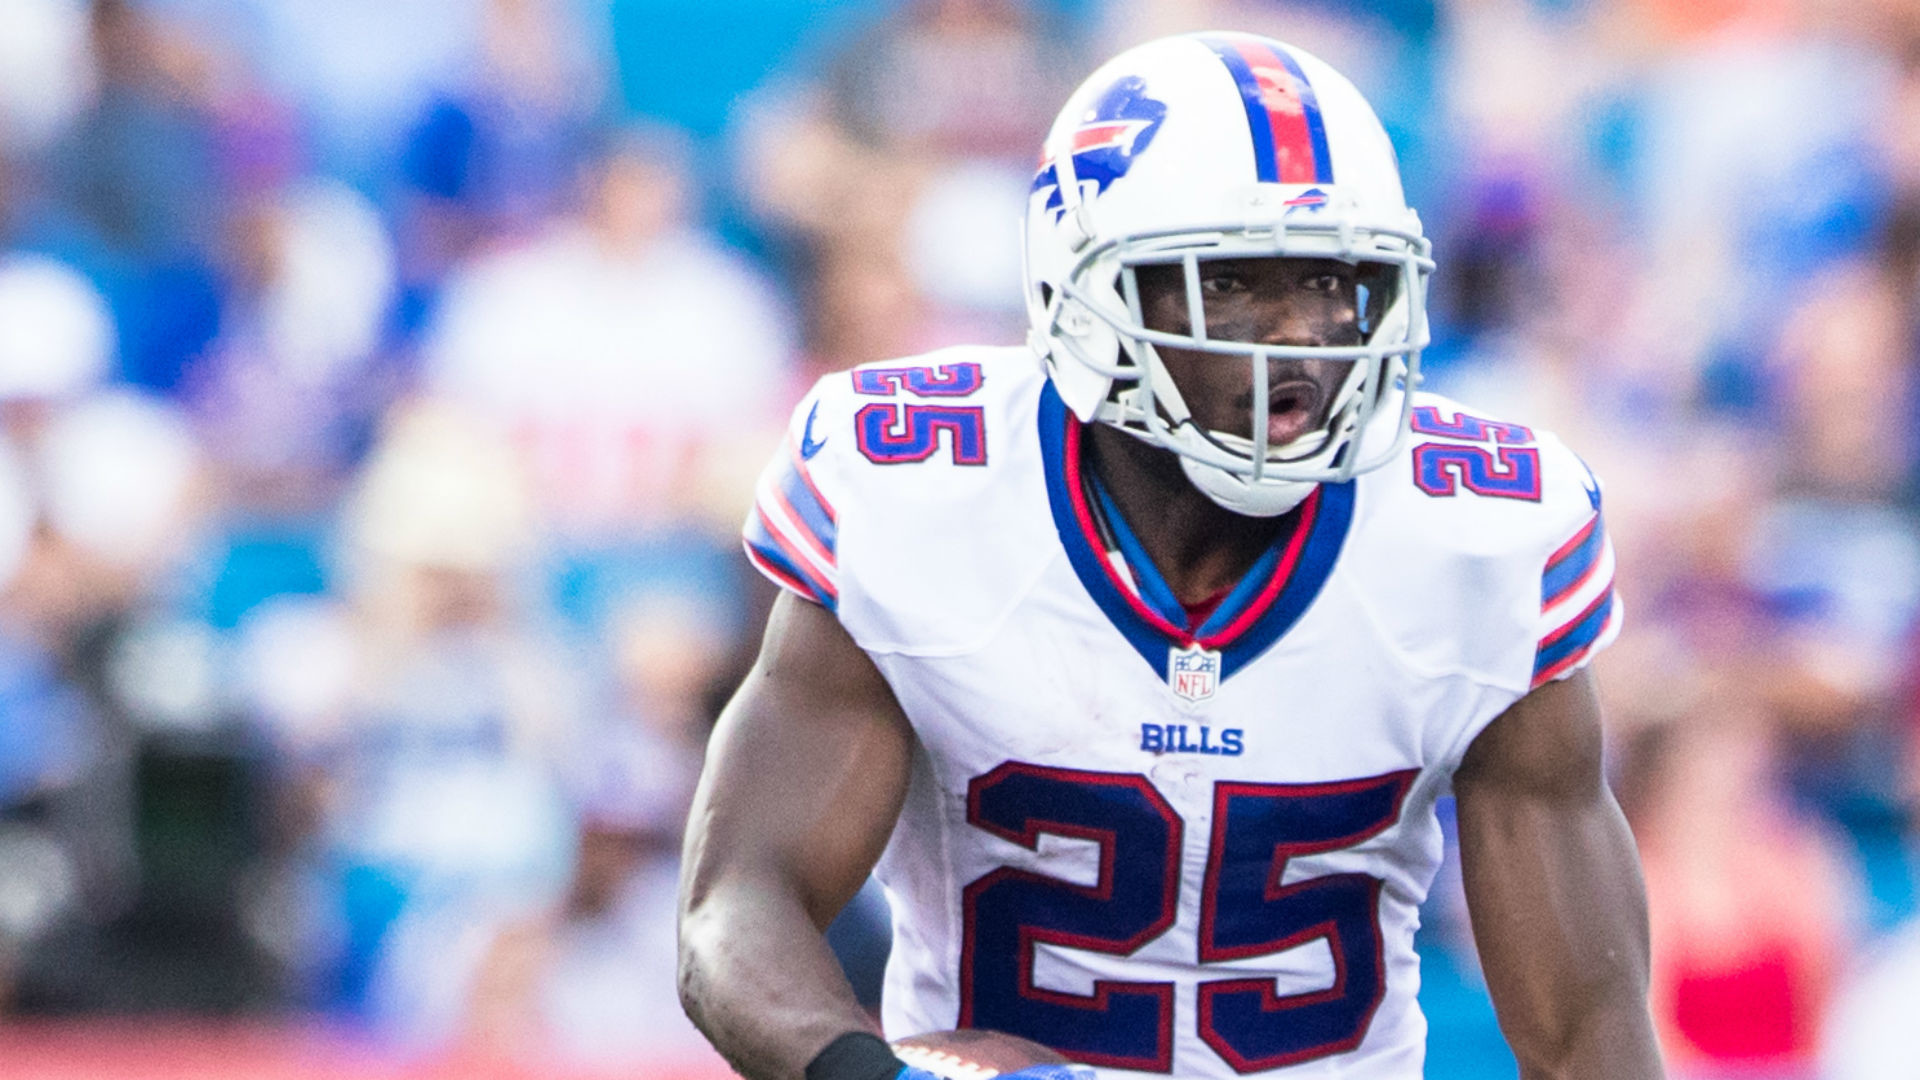 LeSean McCoy will be active Sunday for Bills vs. Dolphins, report says |  NFL | Sporting News